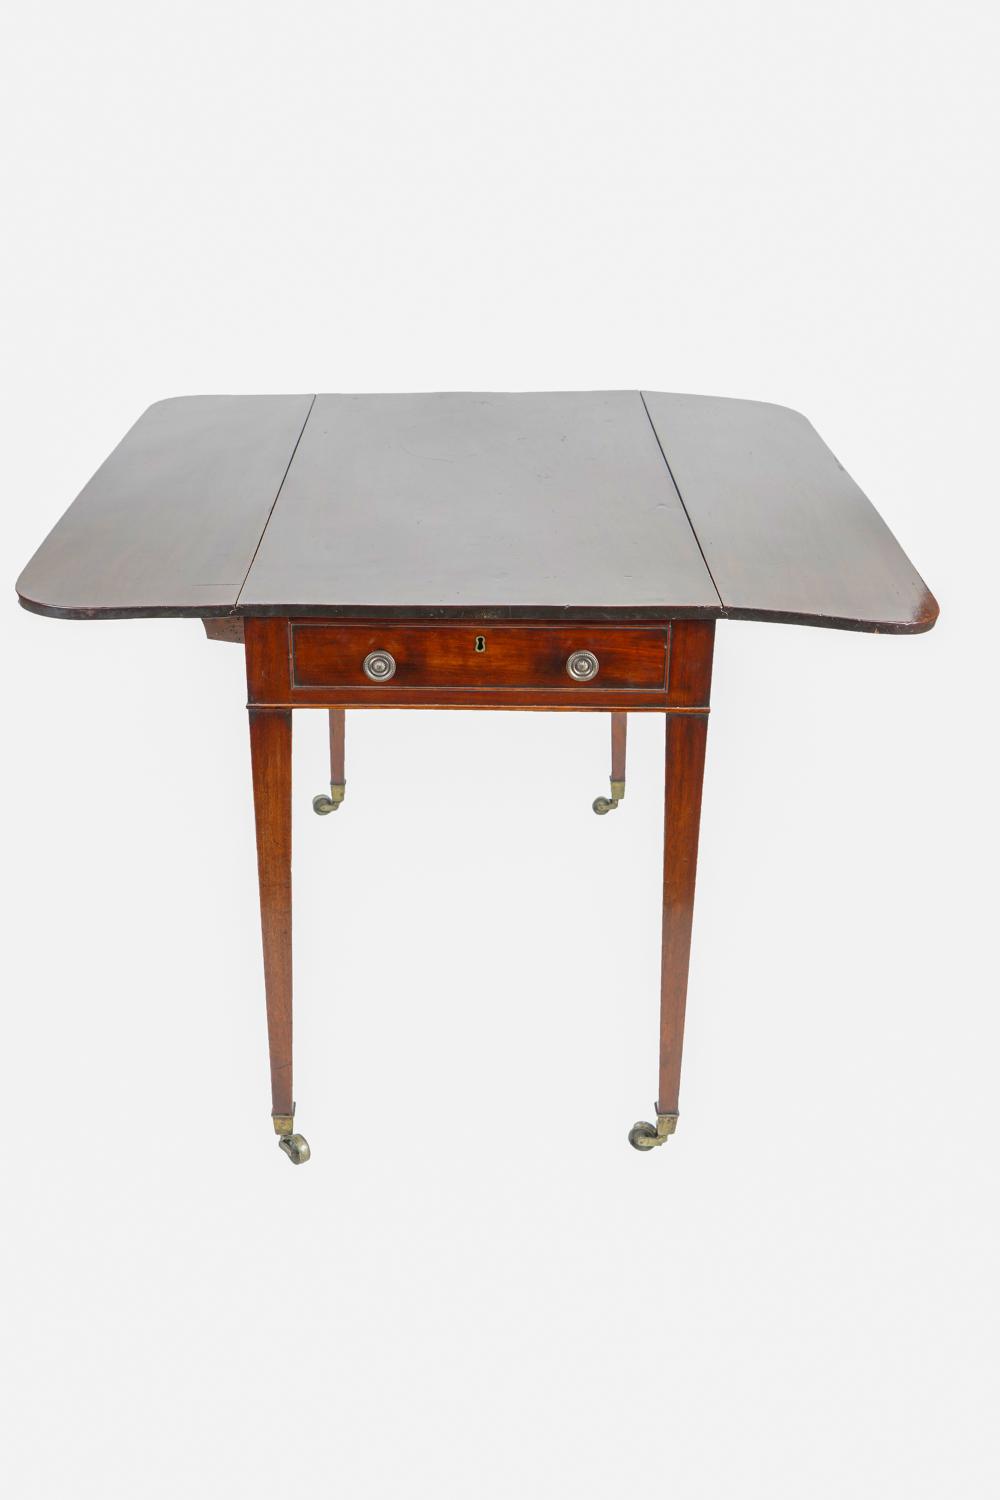 MAHOGANY PEMBROKE TABLEwith one 3379d6